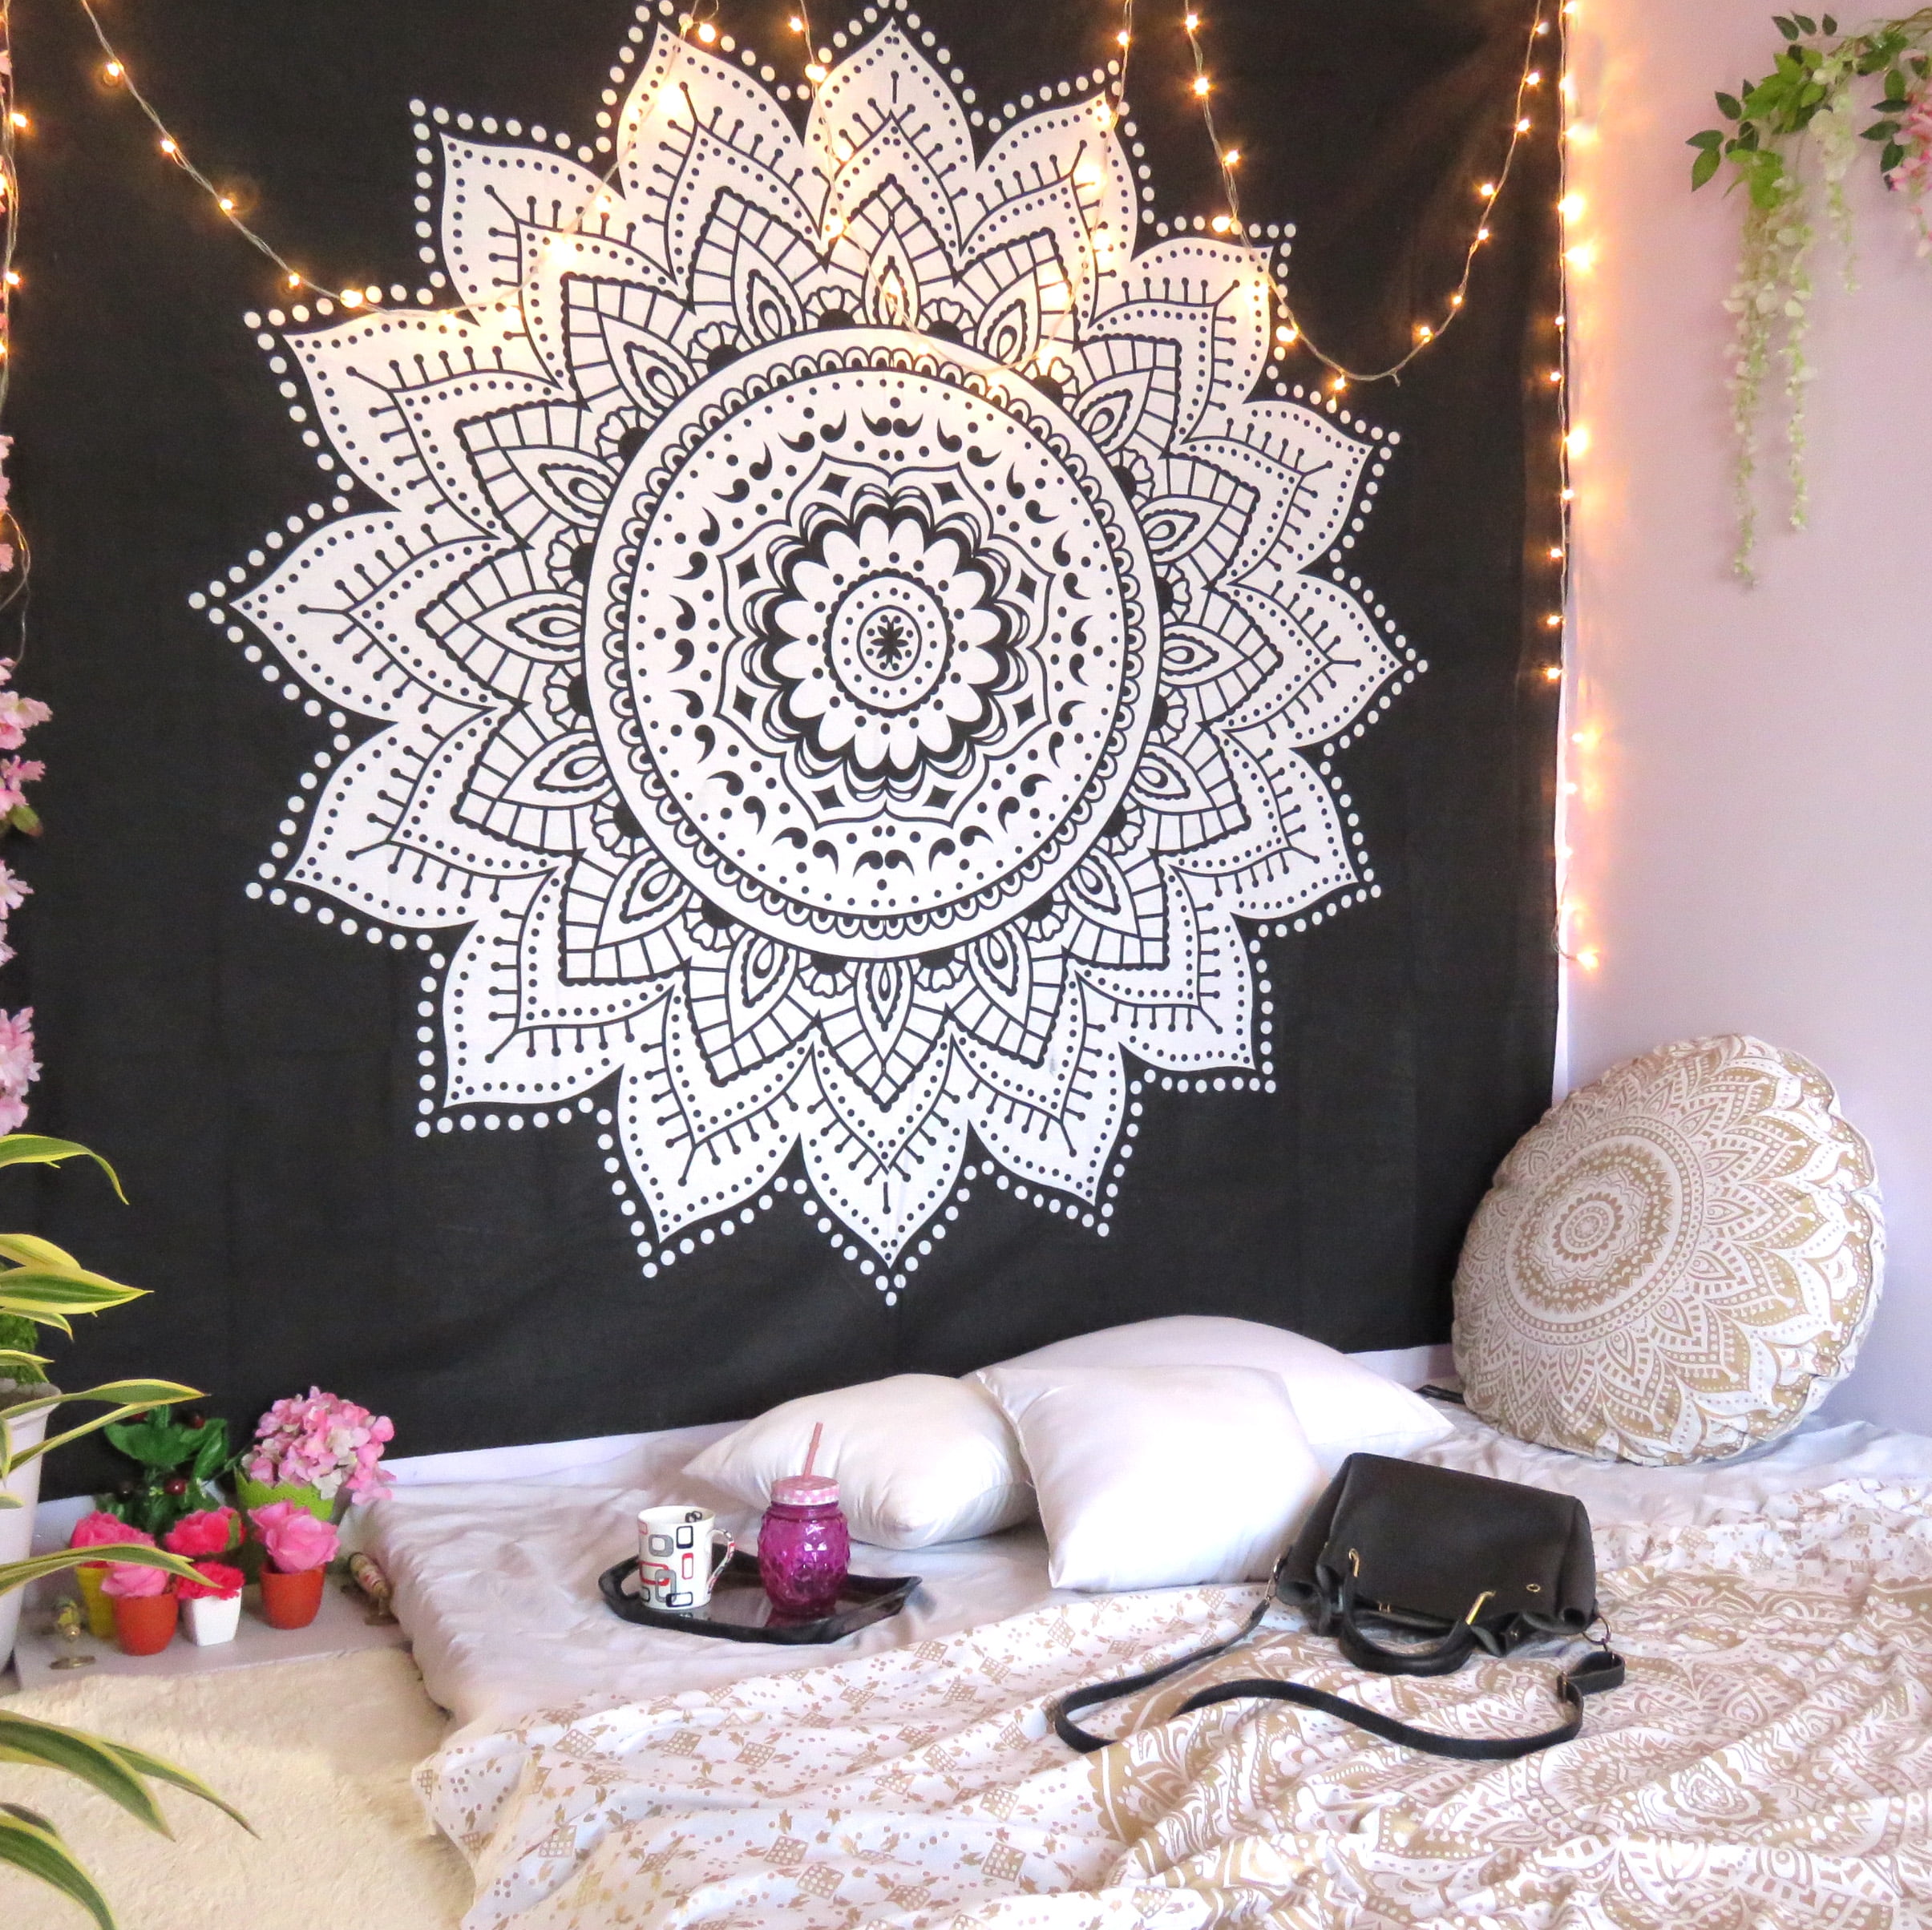 Mandala Tapestry Indian Wall Hanging Decor Bohemian Hippie Ombre Bedspread Throw 